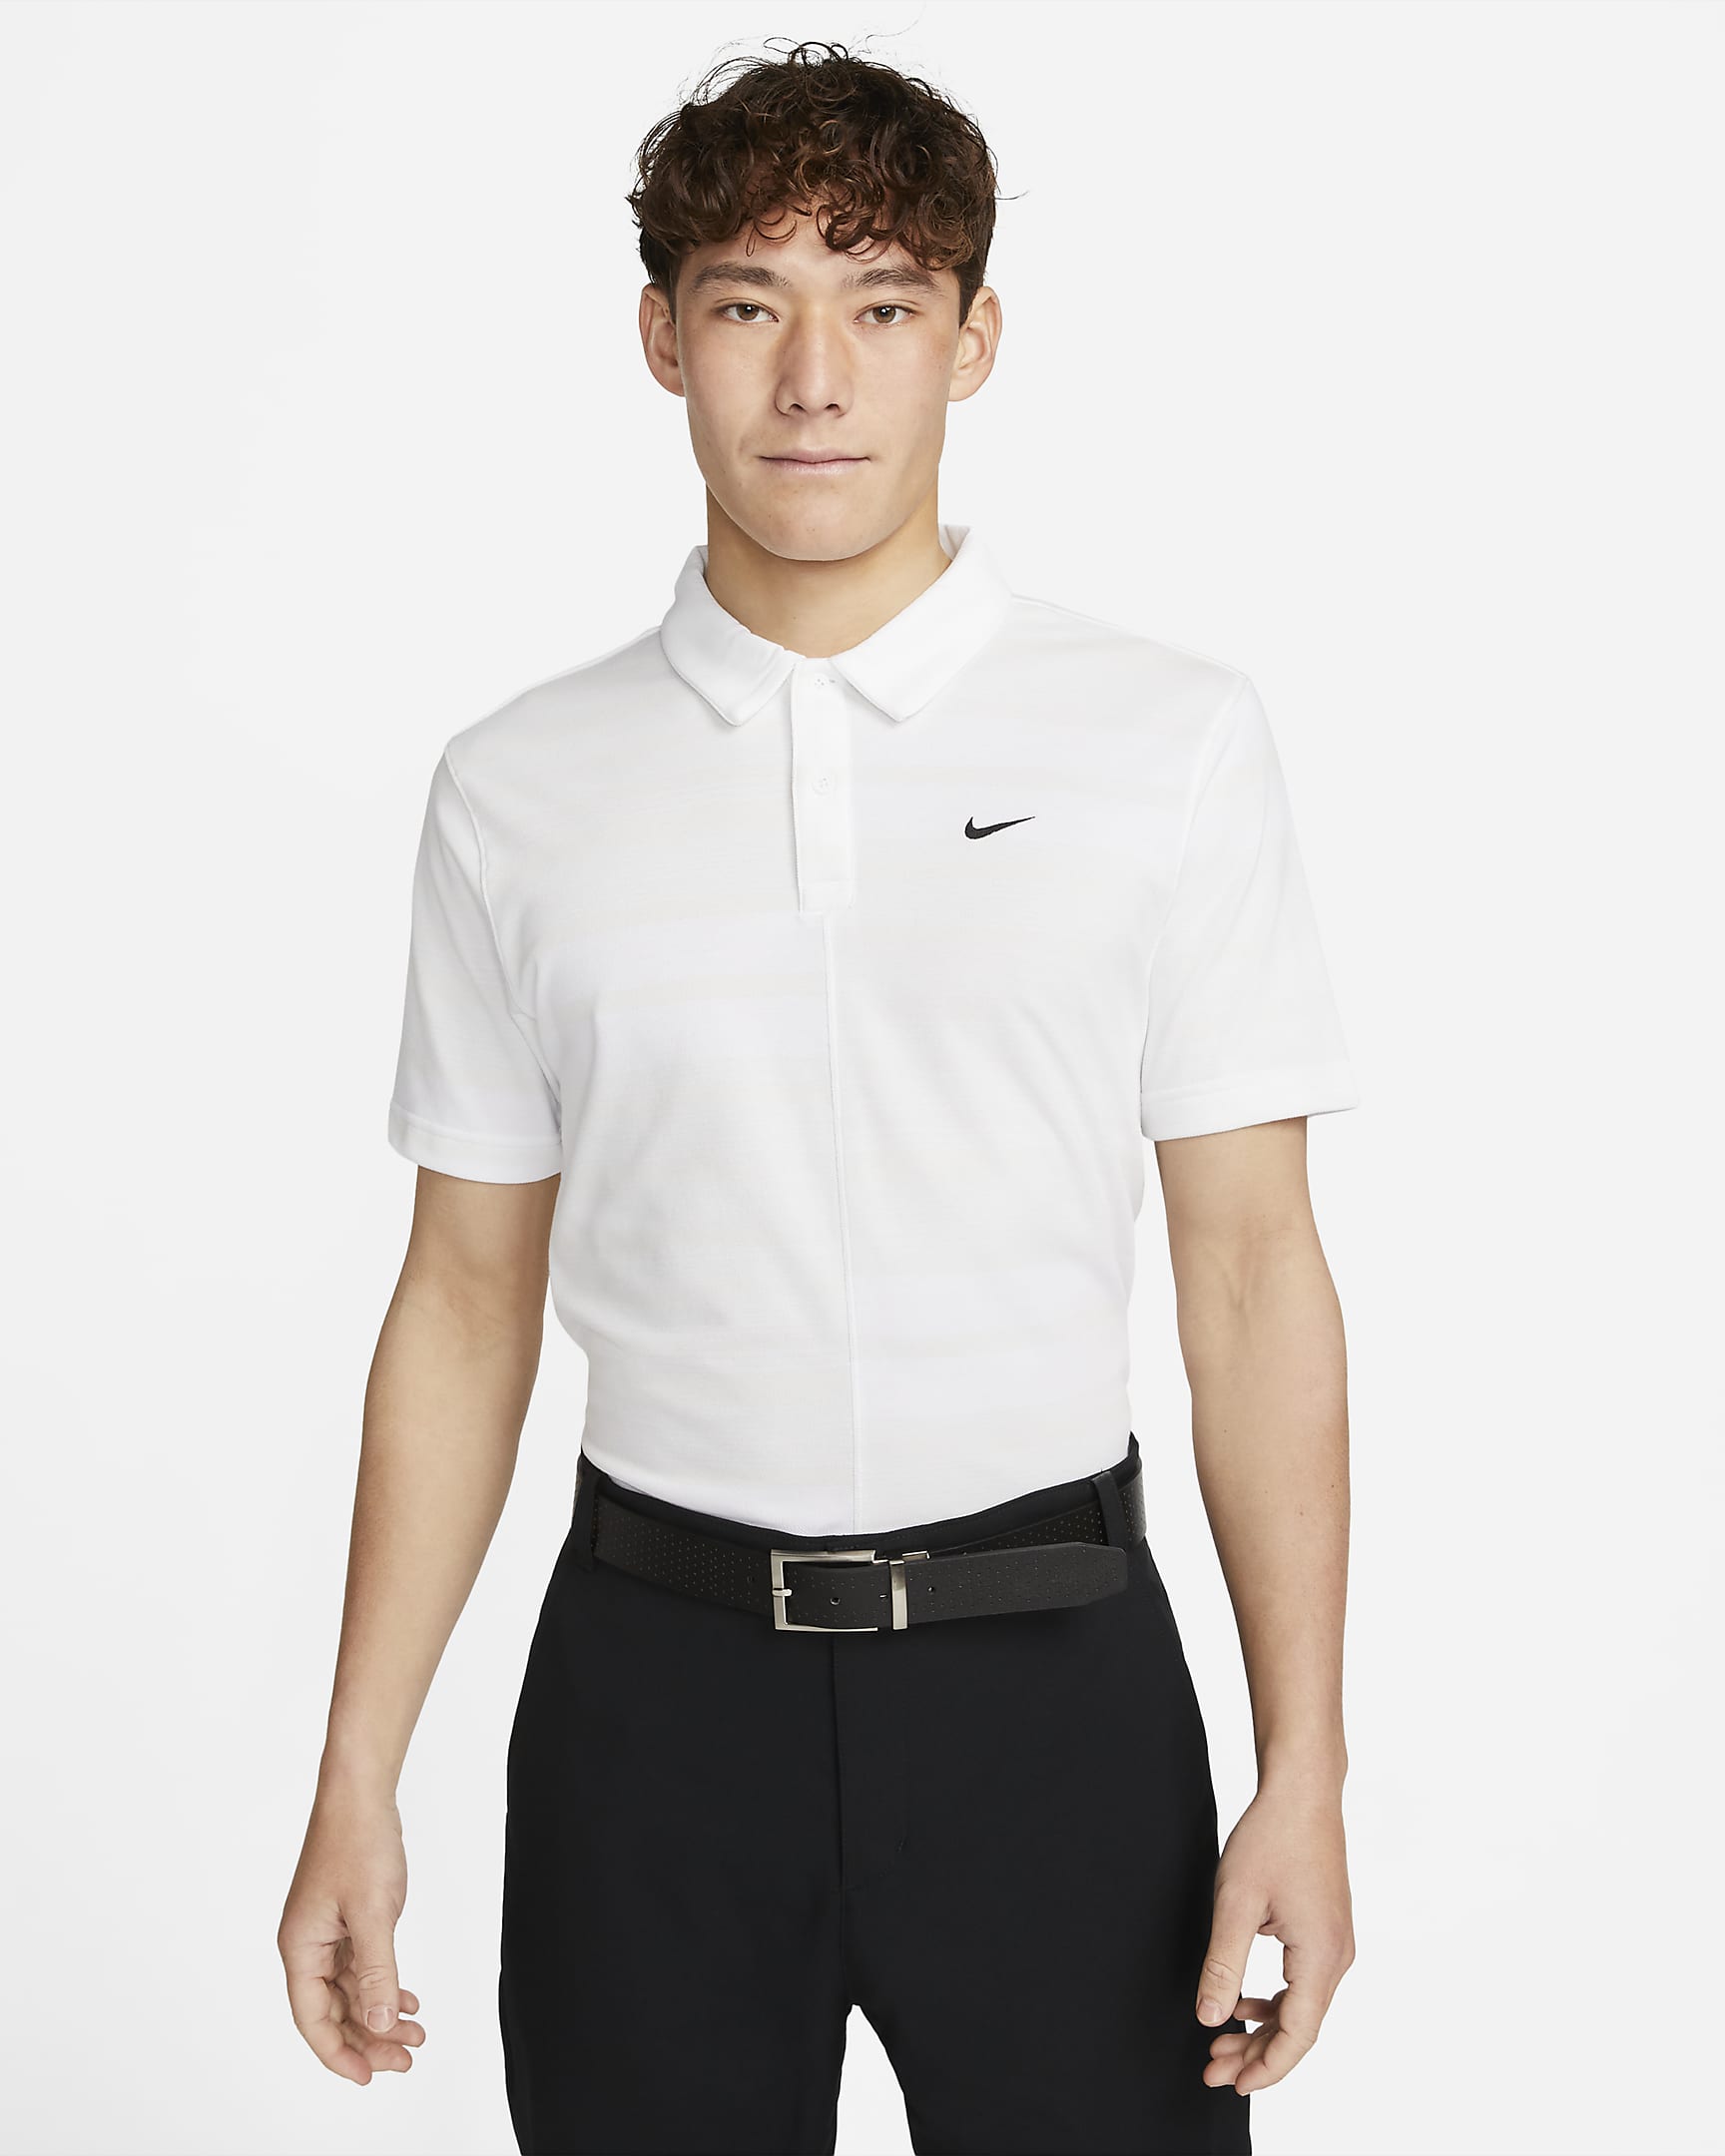 Nike Dri-FIT Unscripted Men's Golf Polo. Nike VN